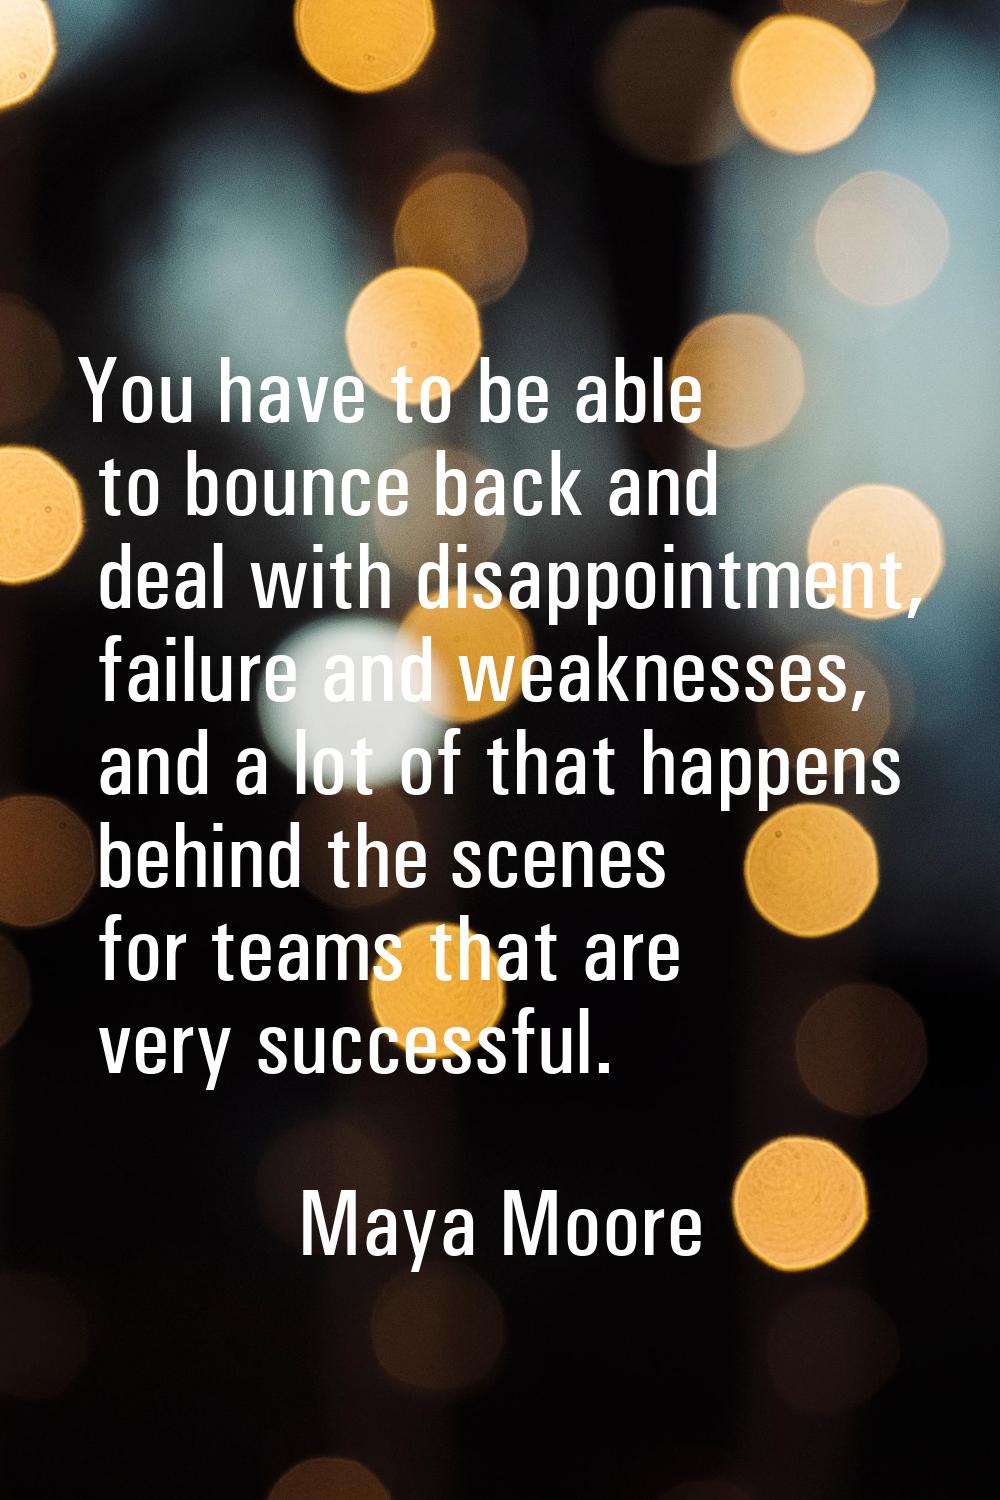 You have to be able to bounce back and deal with disappointment, failure and weaknesses, and a lot 